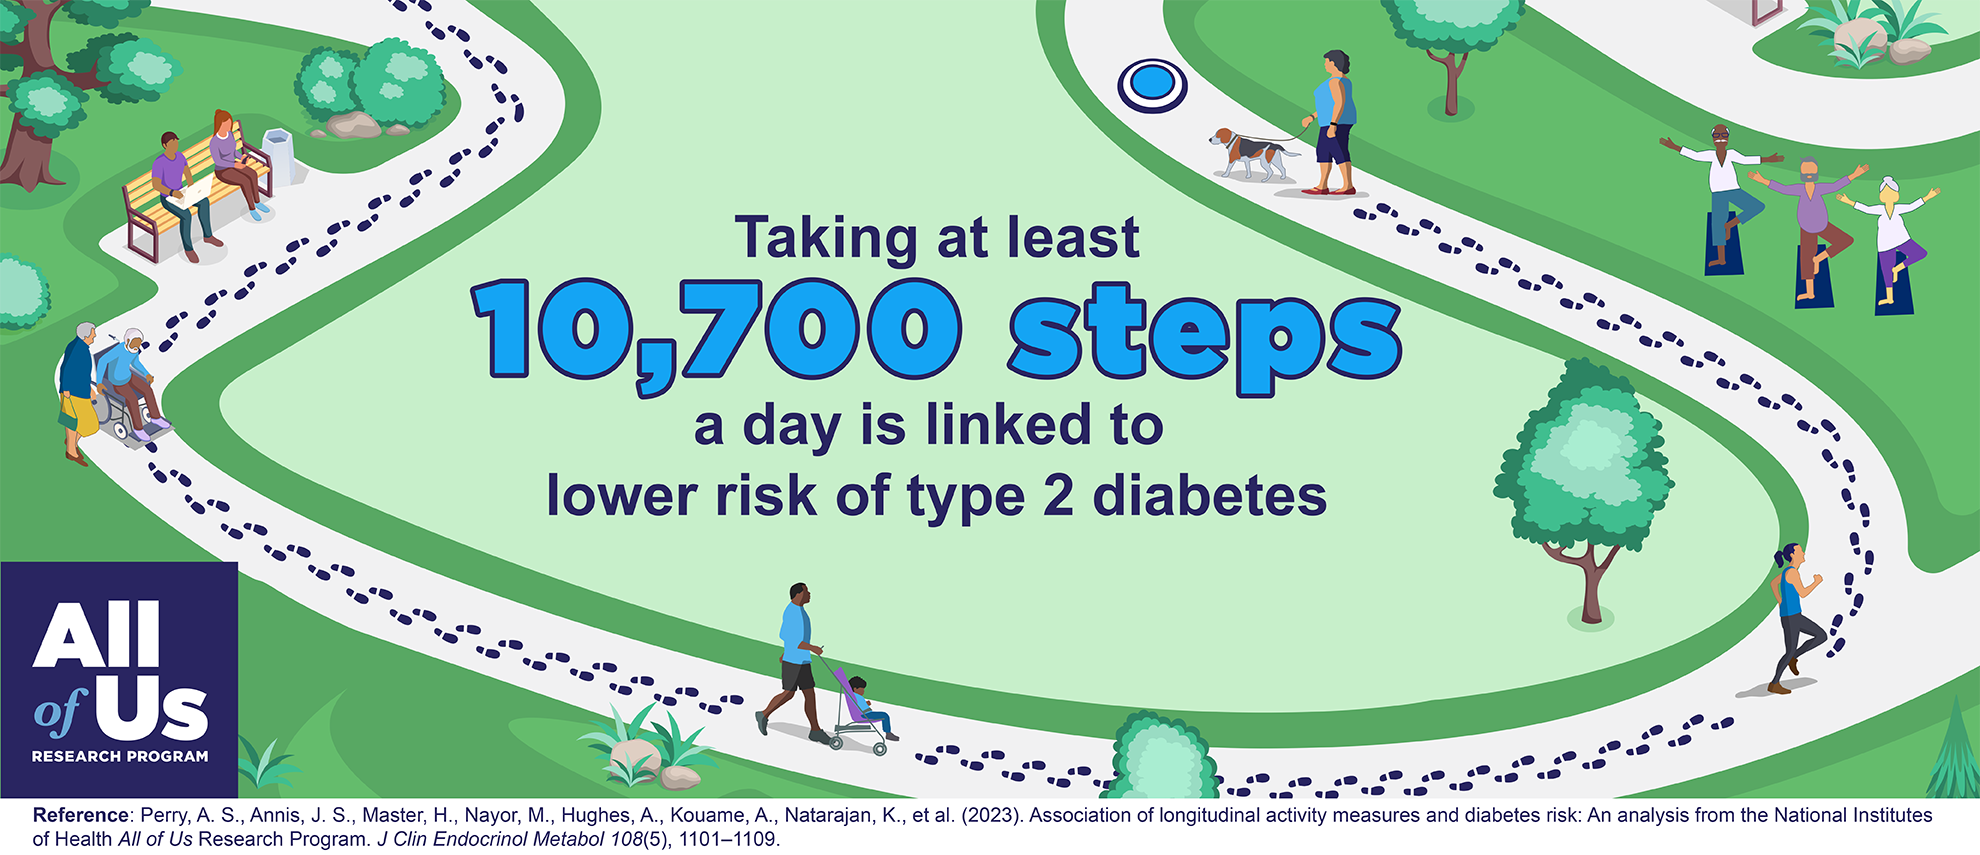 An illustration showing people in a park, walking a dog, pushing a baby stroller, jogging, doing yoga, pushing themselves in a wheelchair, and sitting on a bench. Footprints are shown on a path that winds through the park. The illustration includes the logo of the All of Us Research Program and the text “Taking at least 10,700 steps a day is linked to lower risk of type 2 diabetes.”